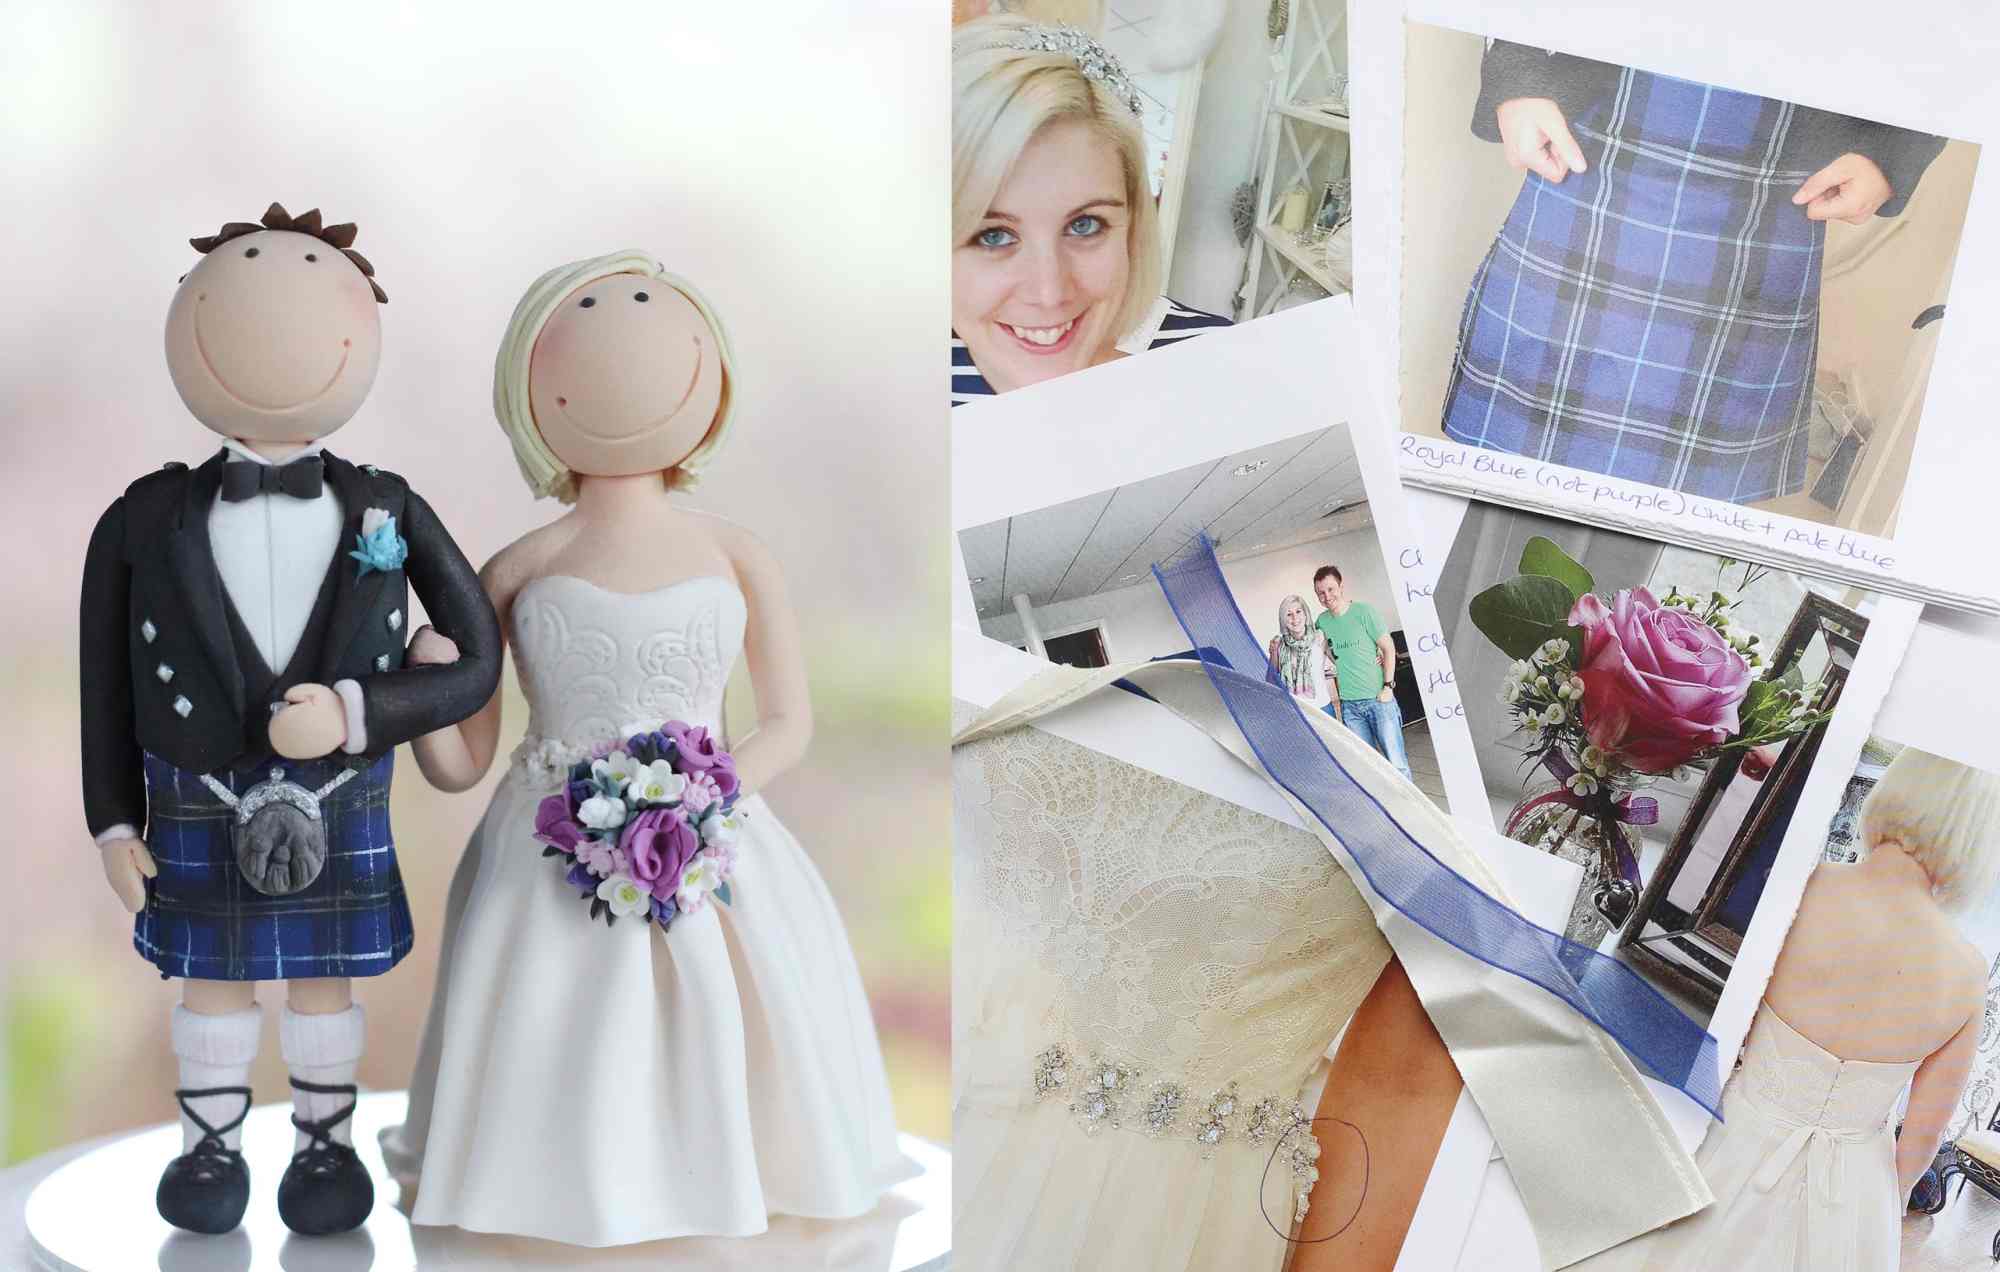 Bride and groom cake toppers by Lindy Smith are lovingly personalised to give you a wedding keepsake to cherish forever